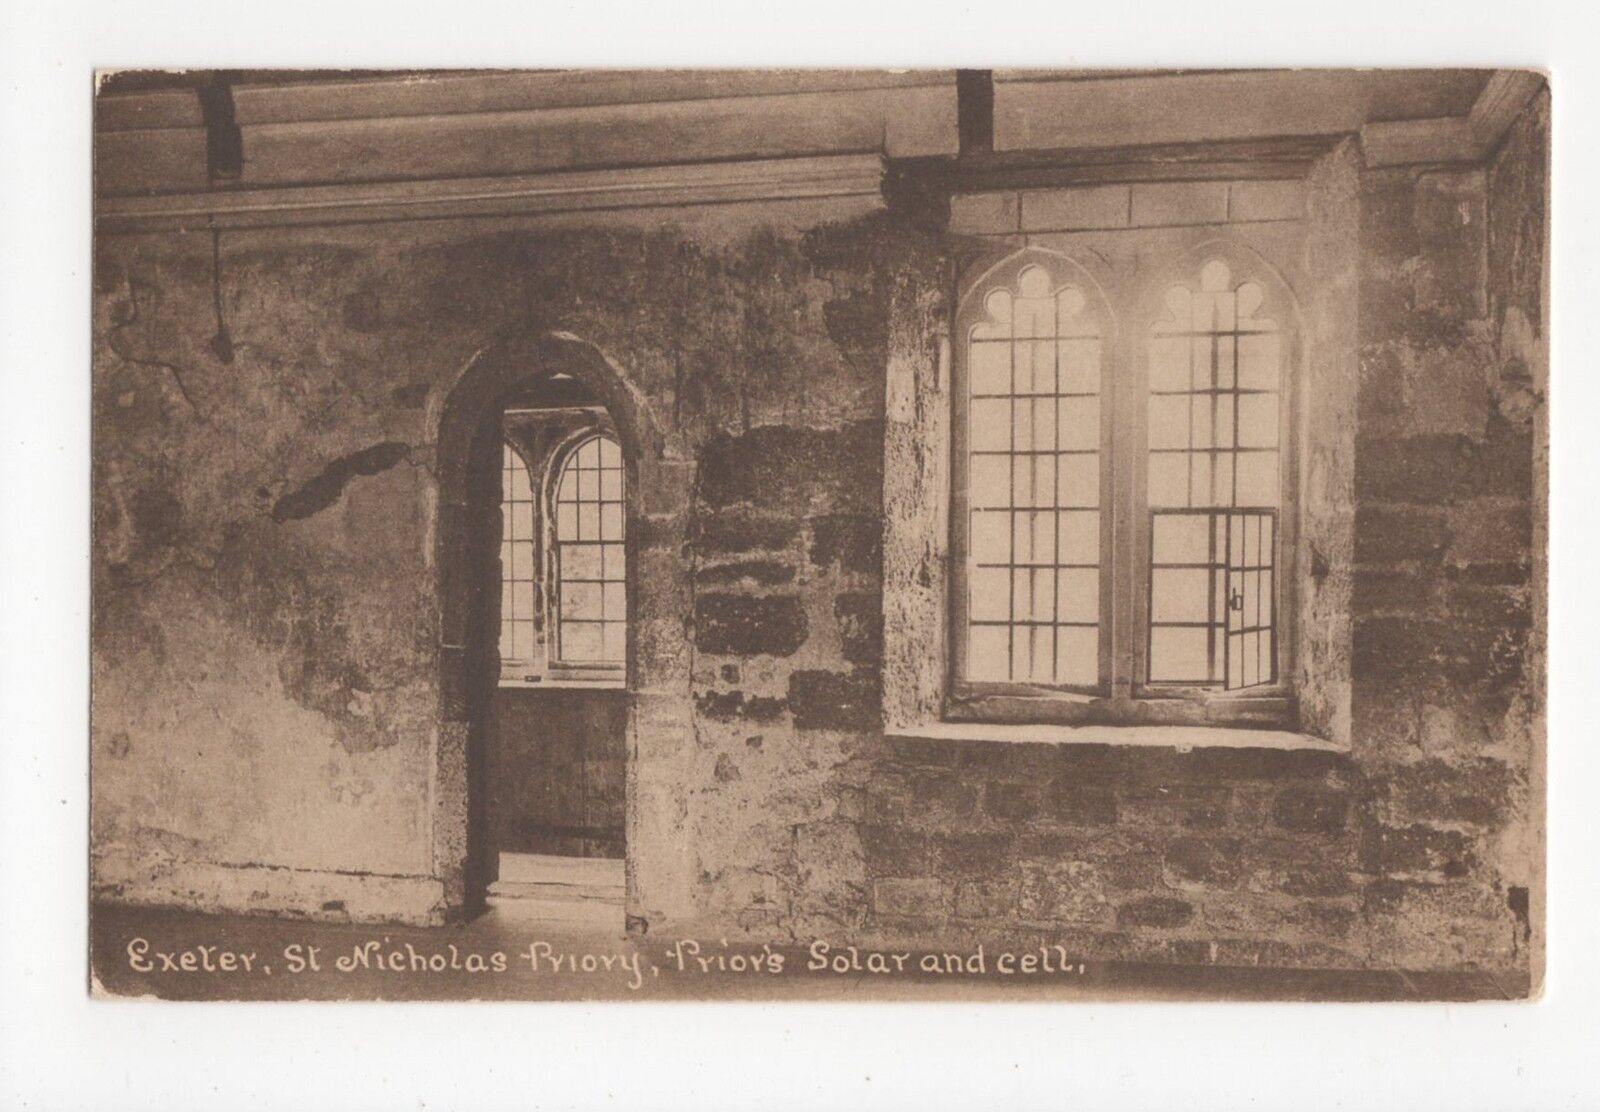 Exeter, St. Nicholas Priory, Solar & Cell Postcard, A456